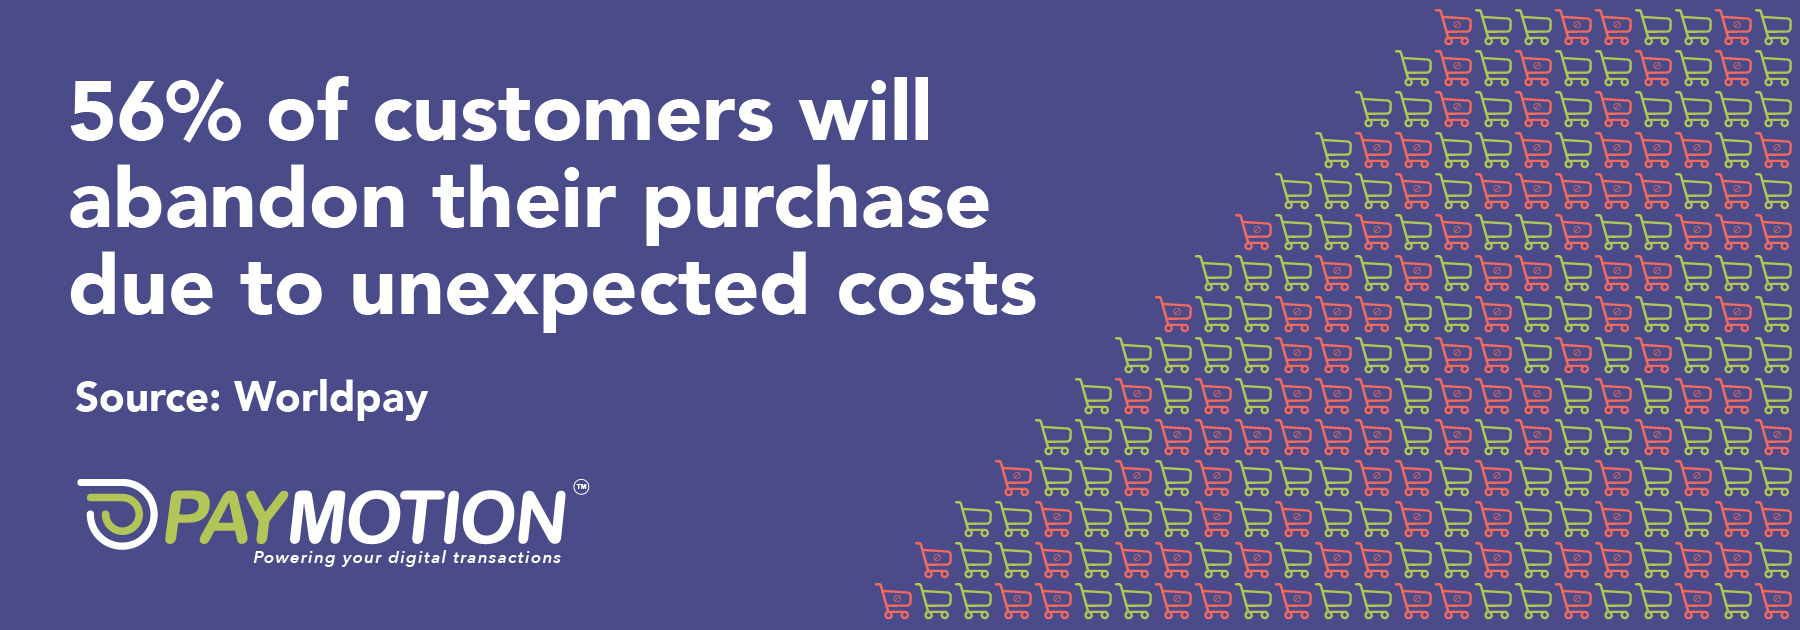 56% of customers will abandon their purchase due to unexpected costs